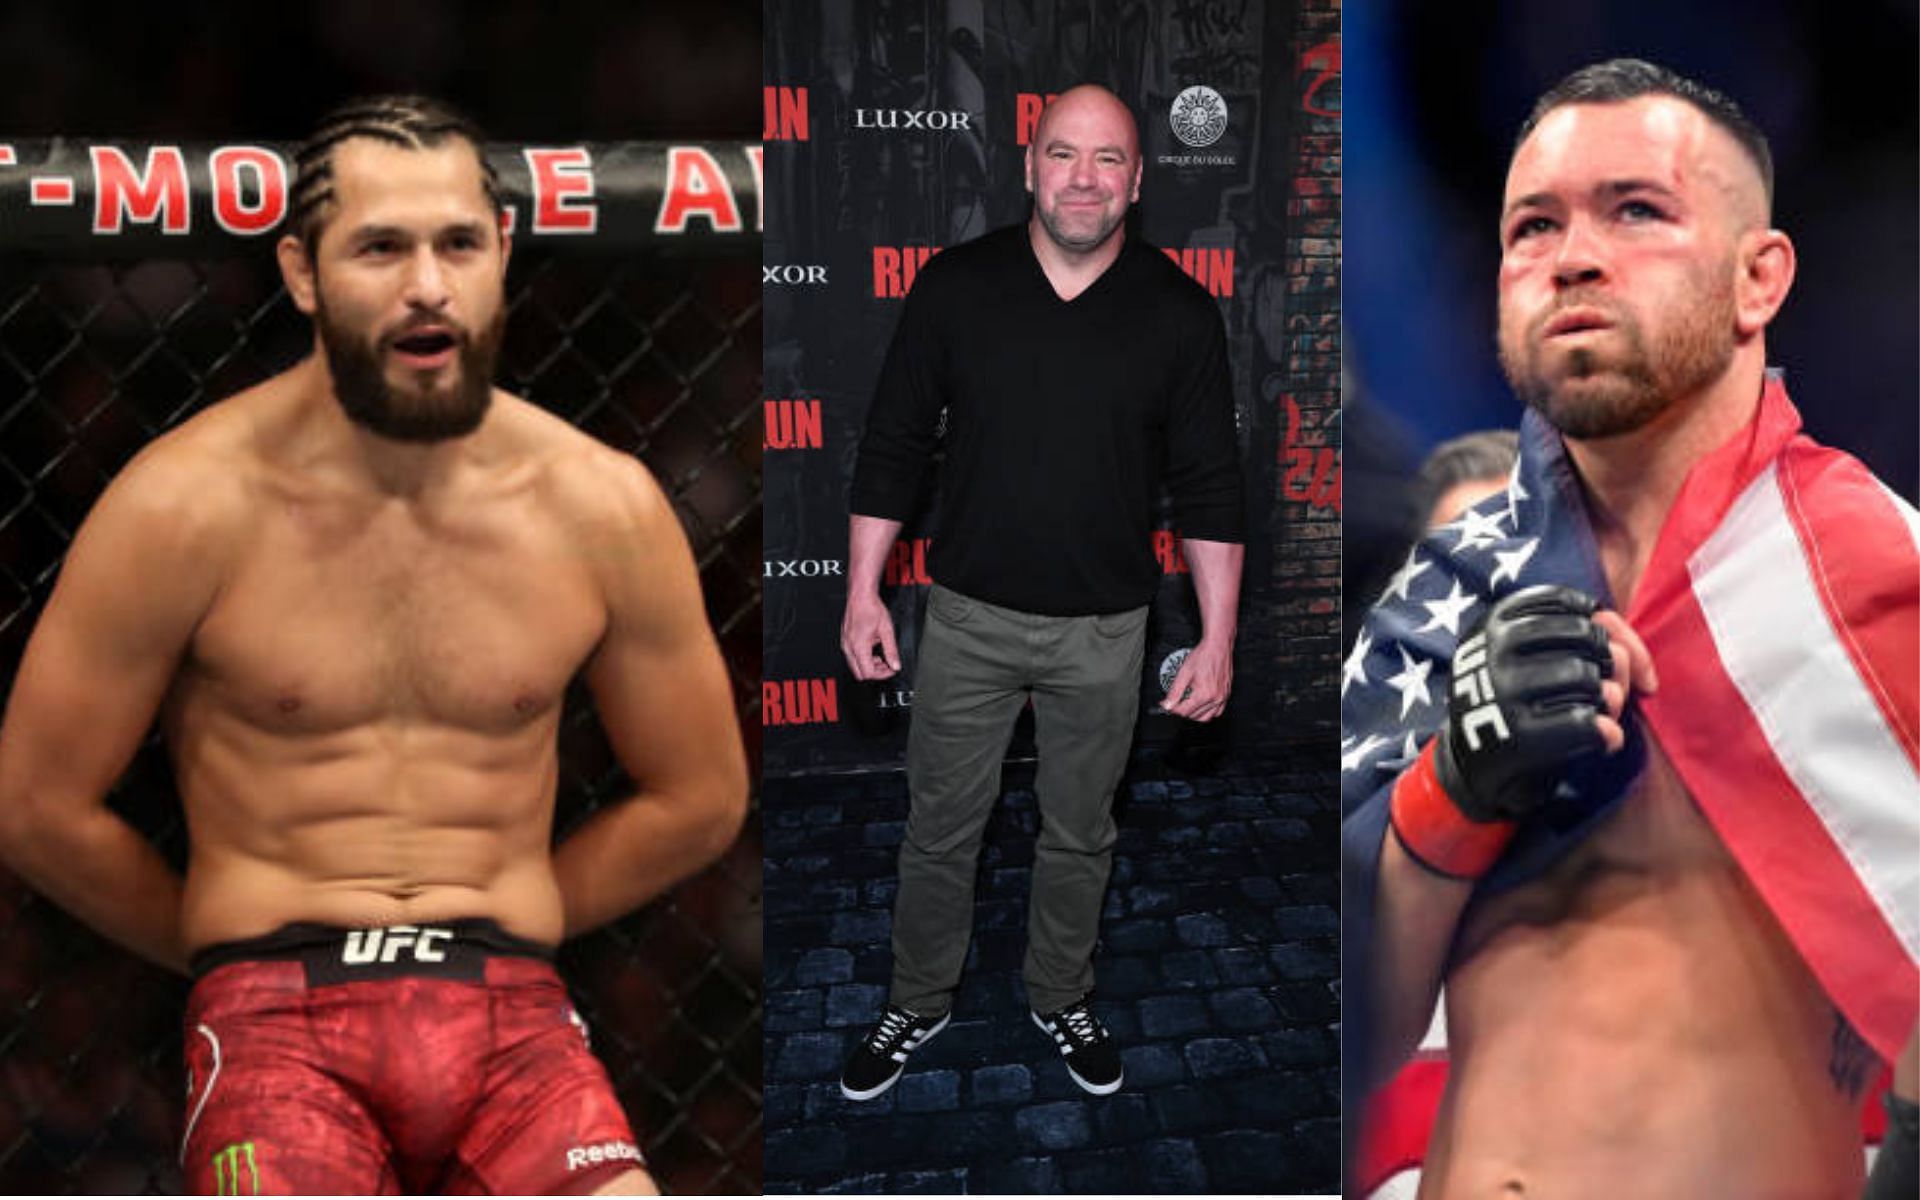 From left to right: Jorge Masvidal, Dana White, and Colby Covington